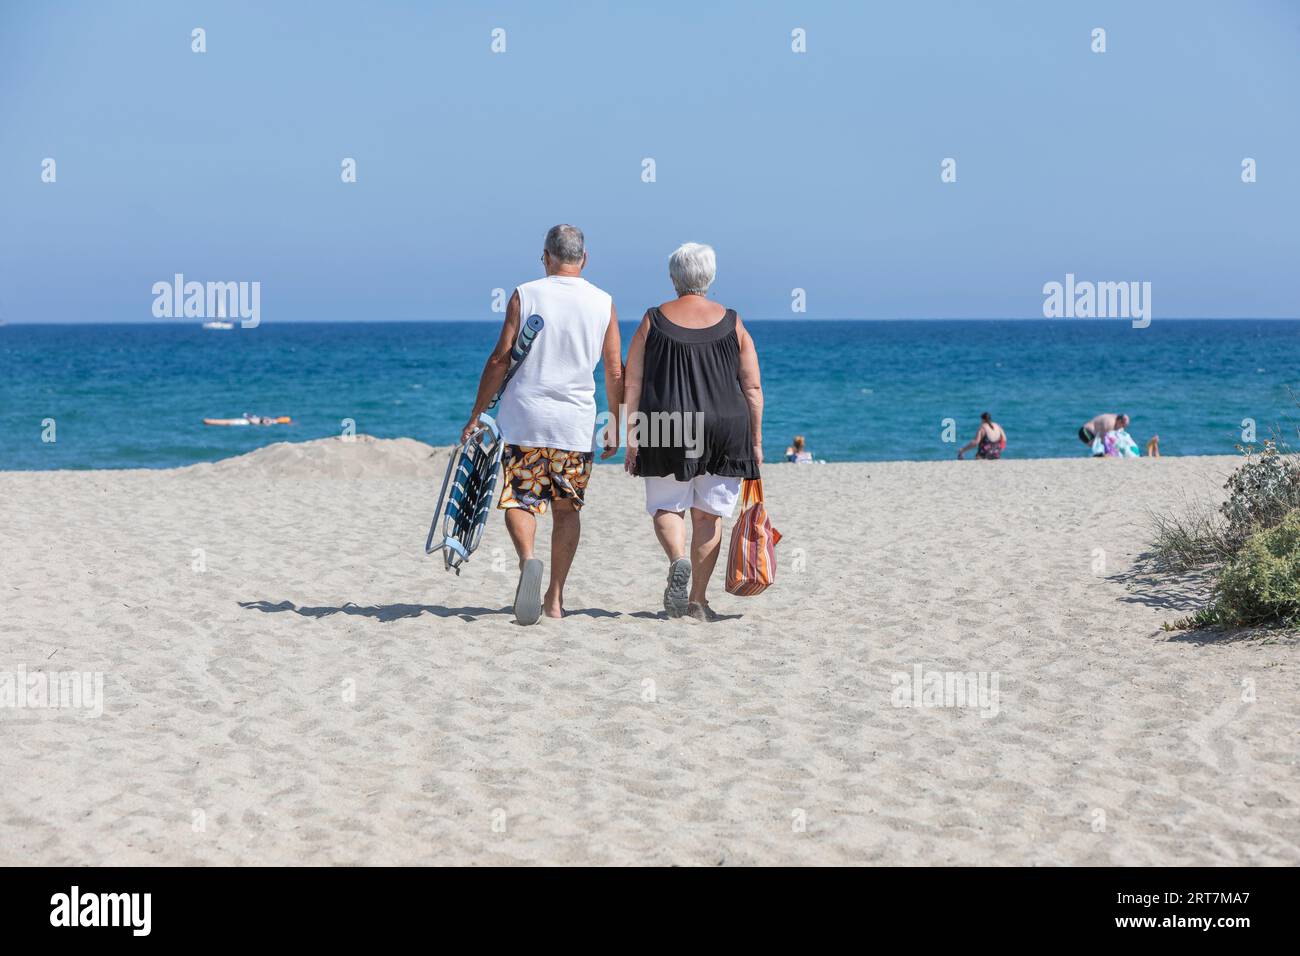 A couple walking onto a sandy Mediterranean beach at Le Barcares, South of France Stock Photo